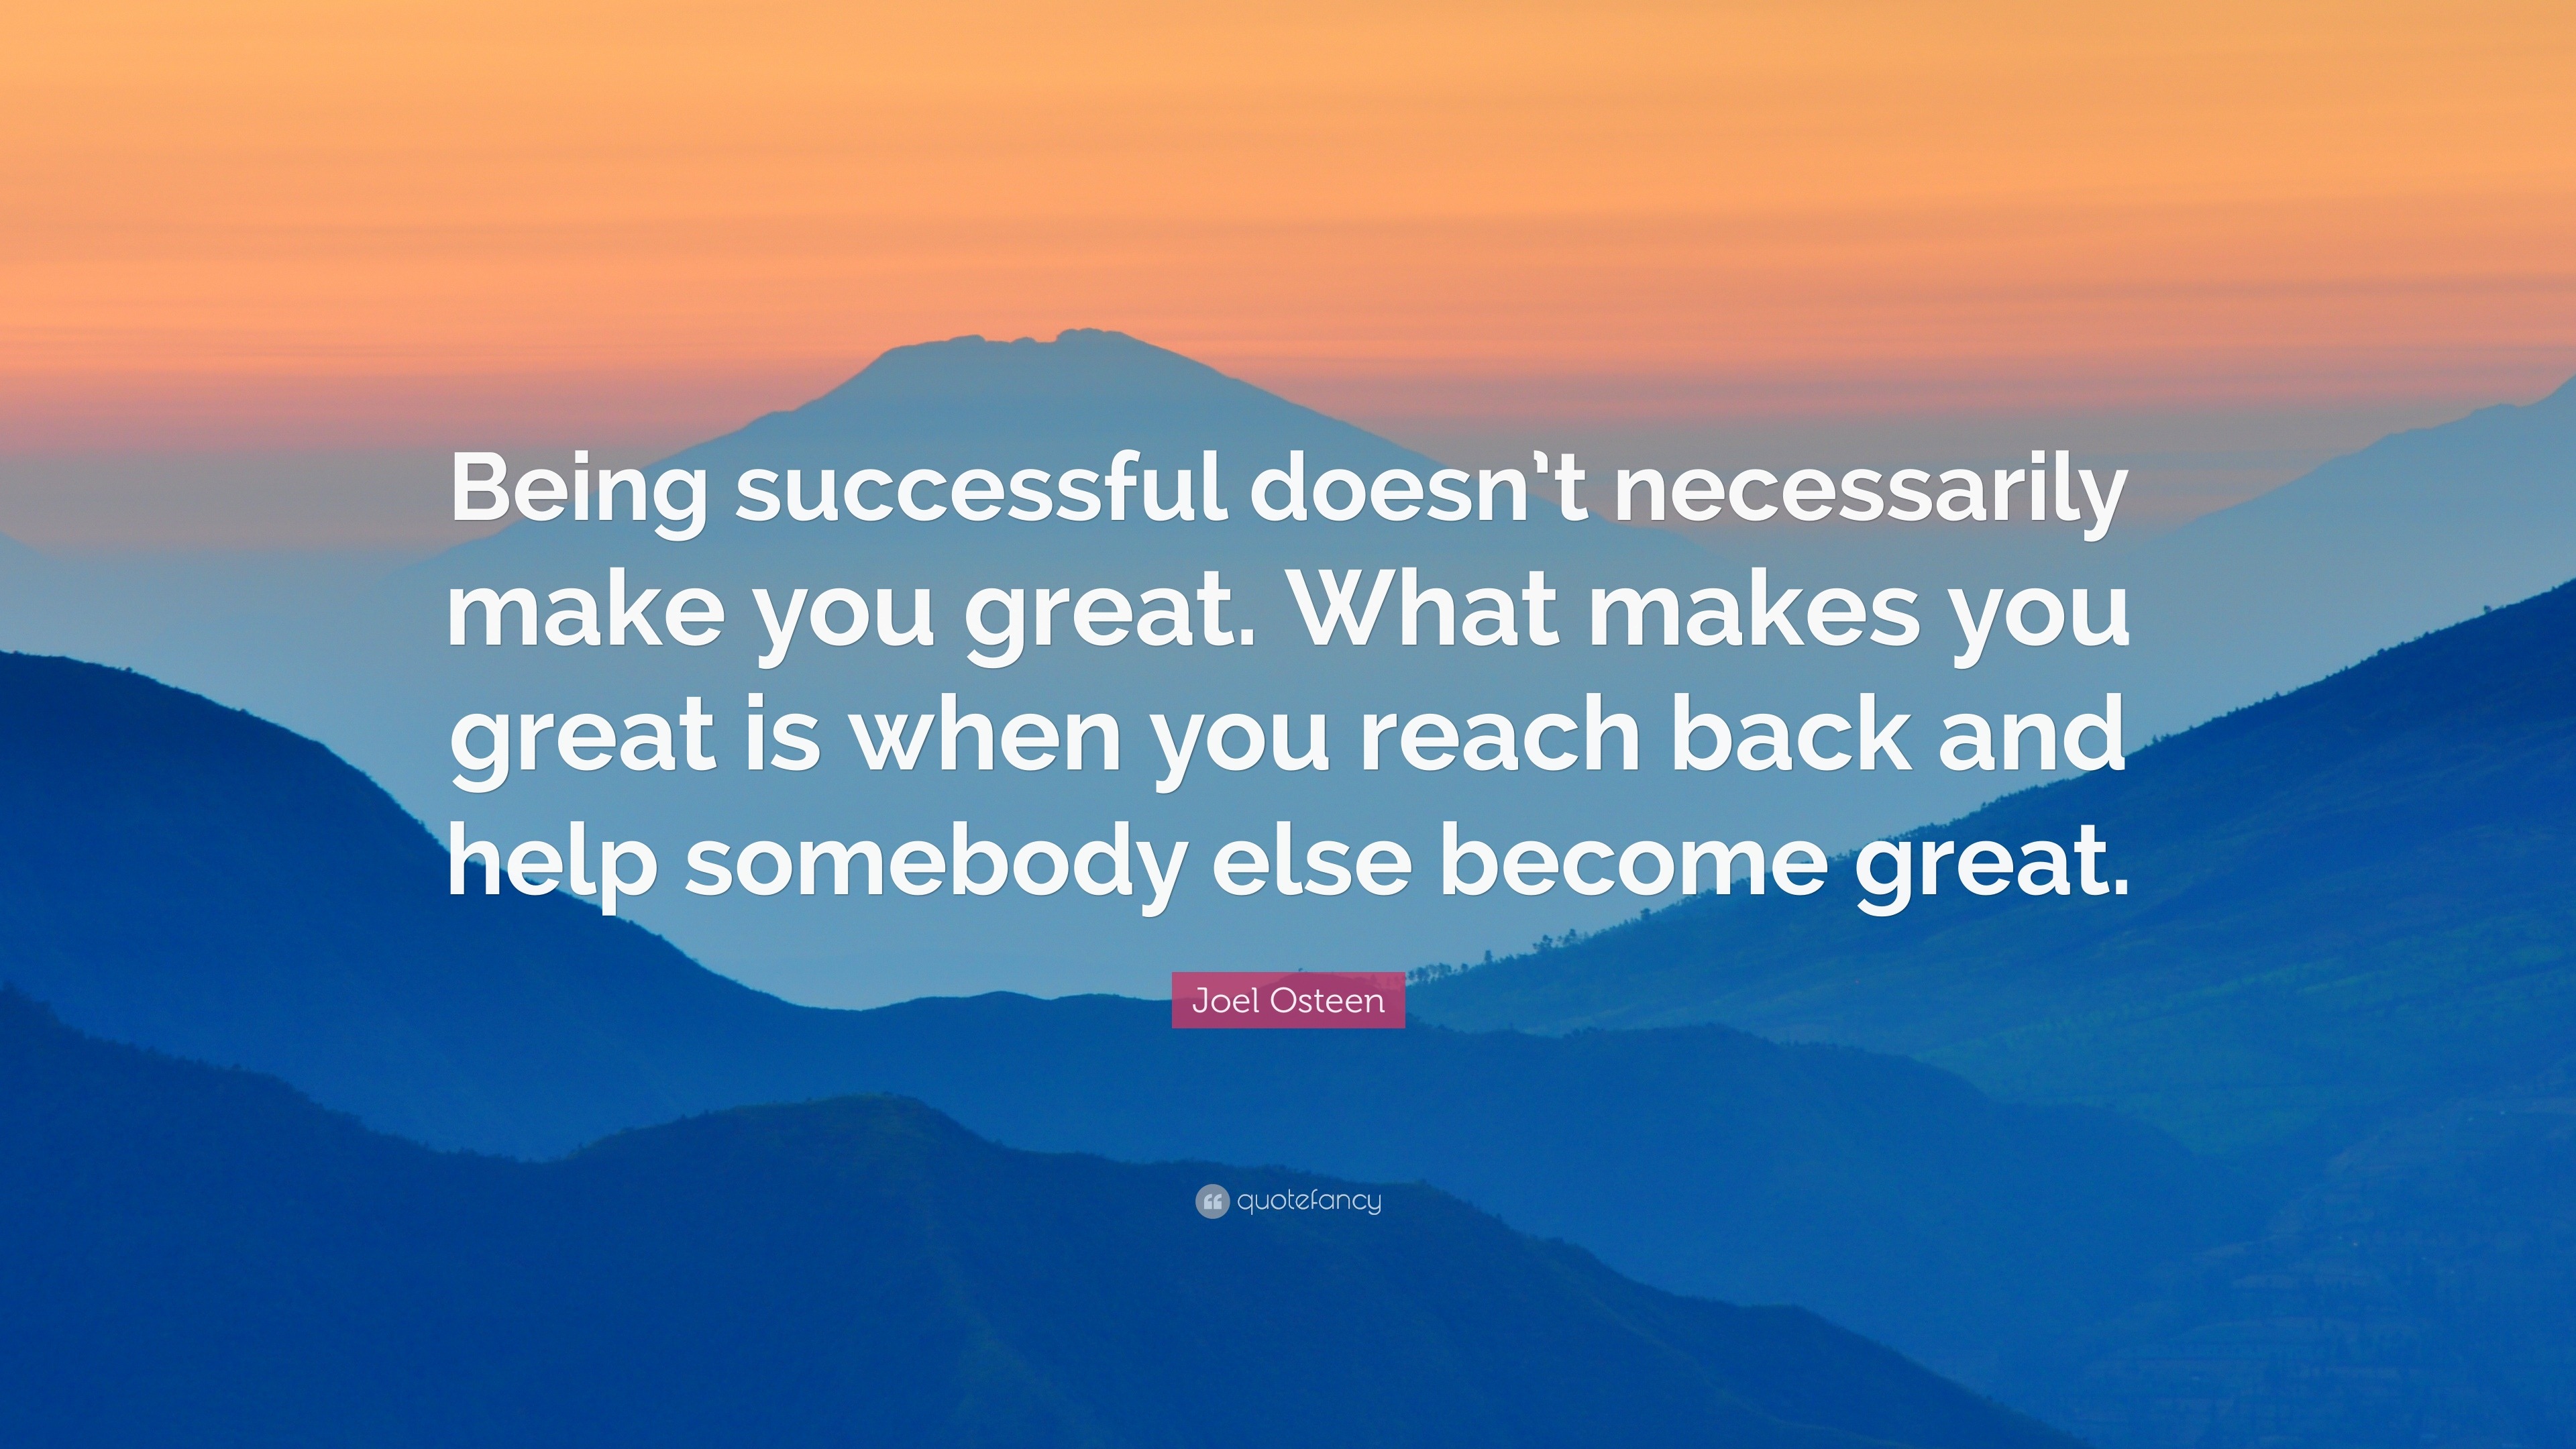 Joel Osteen Quote: “Being successful doesn’t necessarily make you great ...